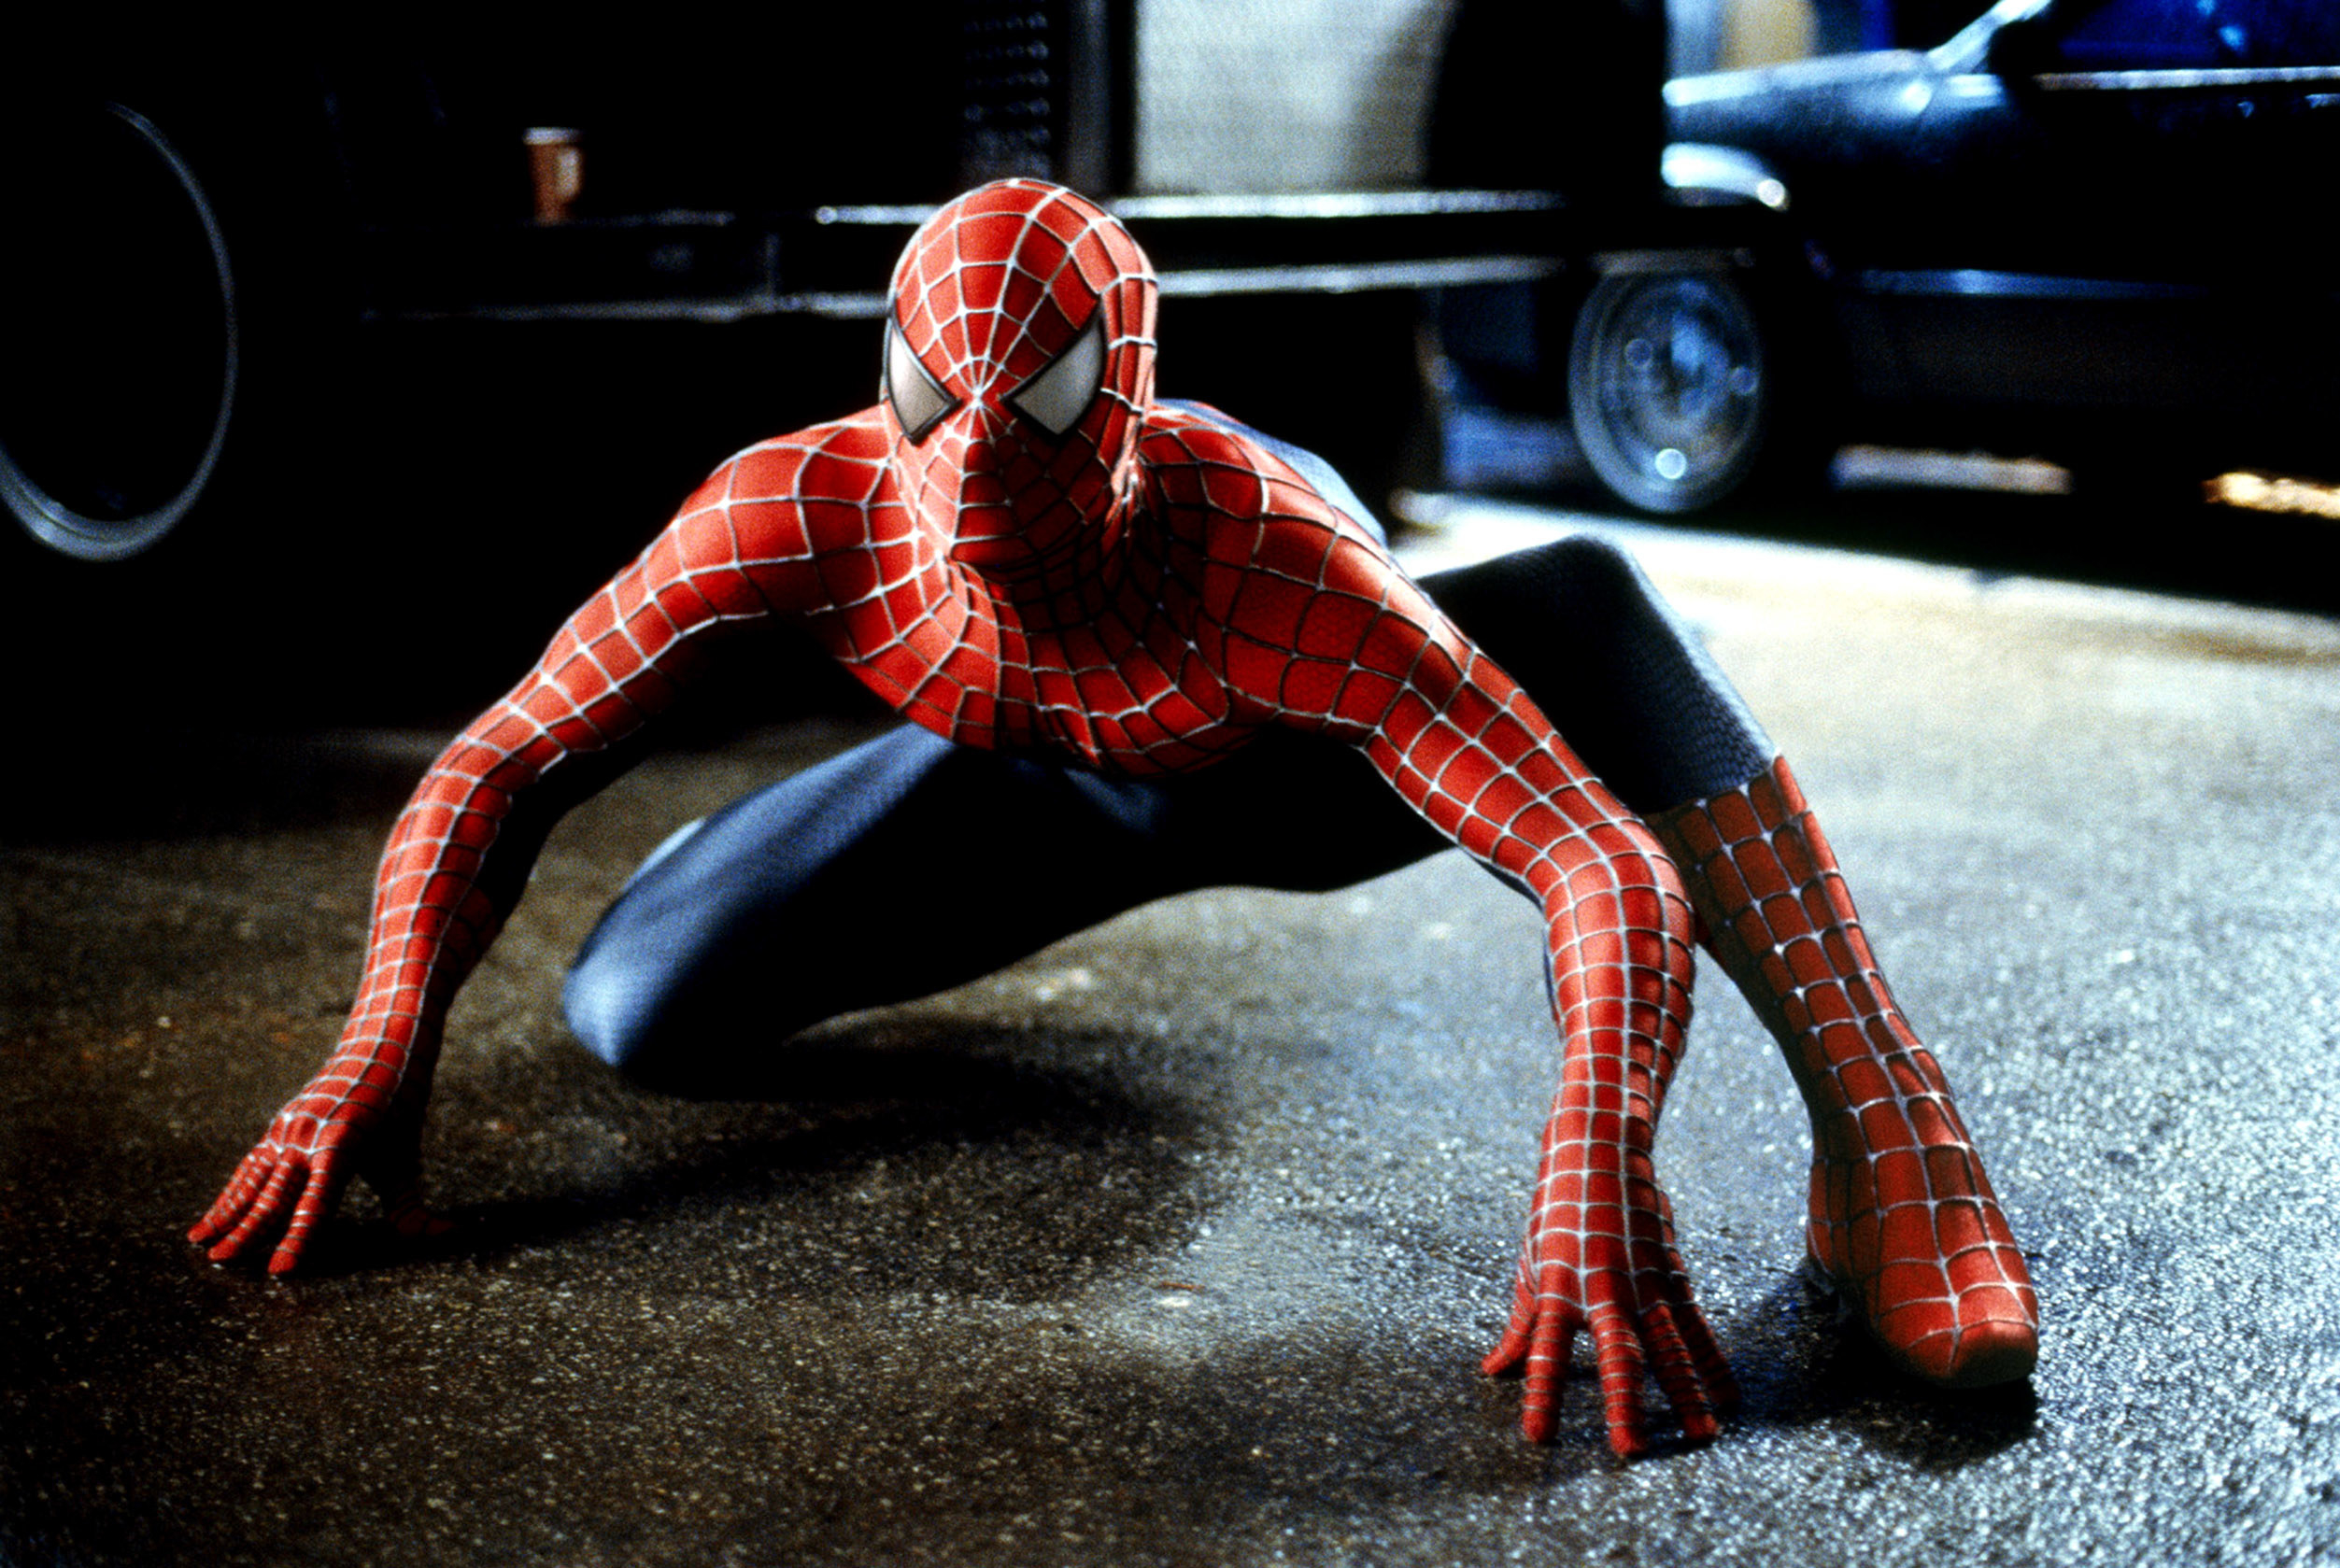 Tobey Maguire posed as Spider-Man